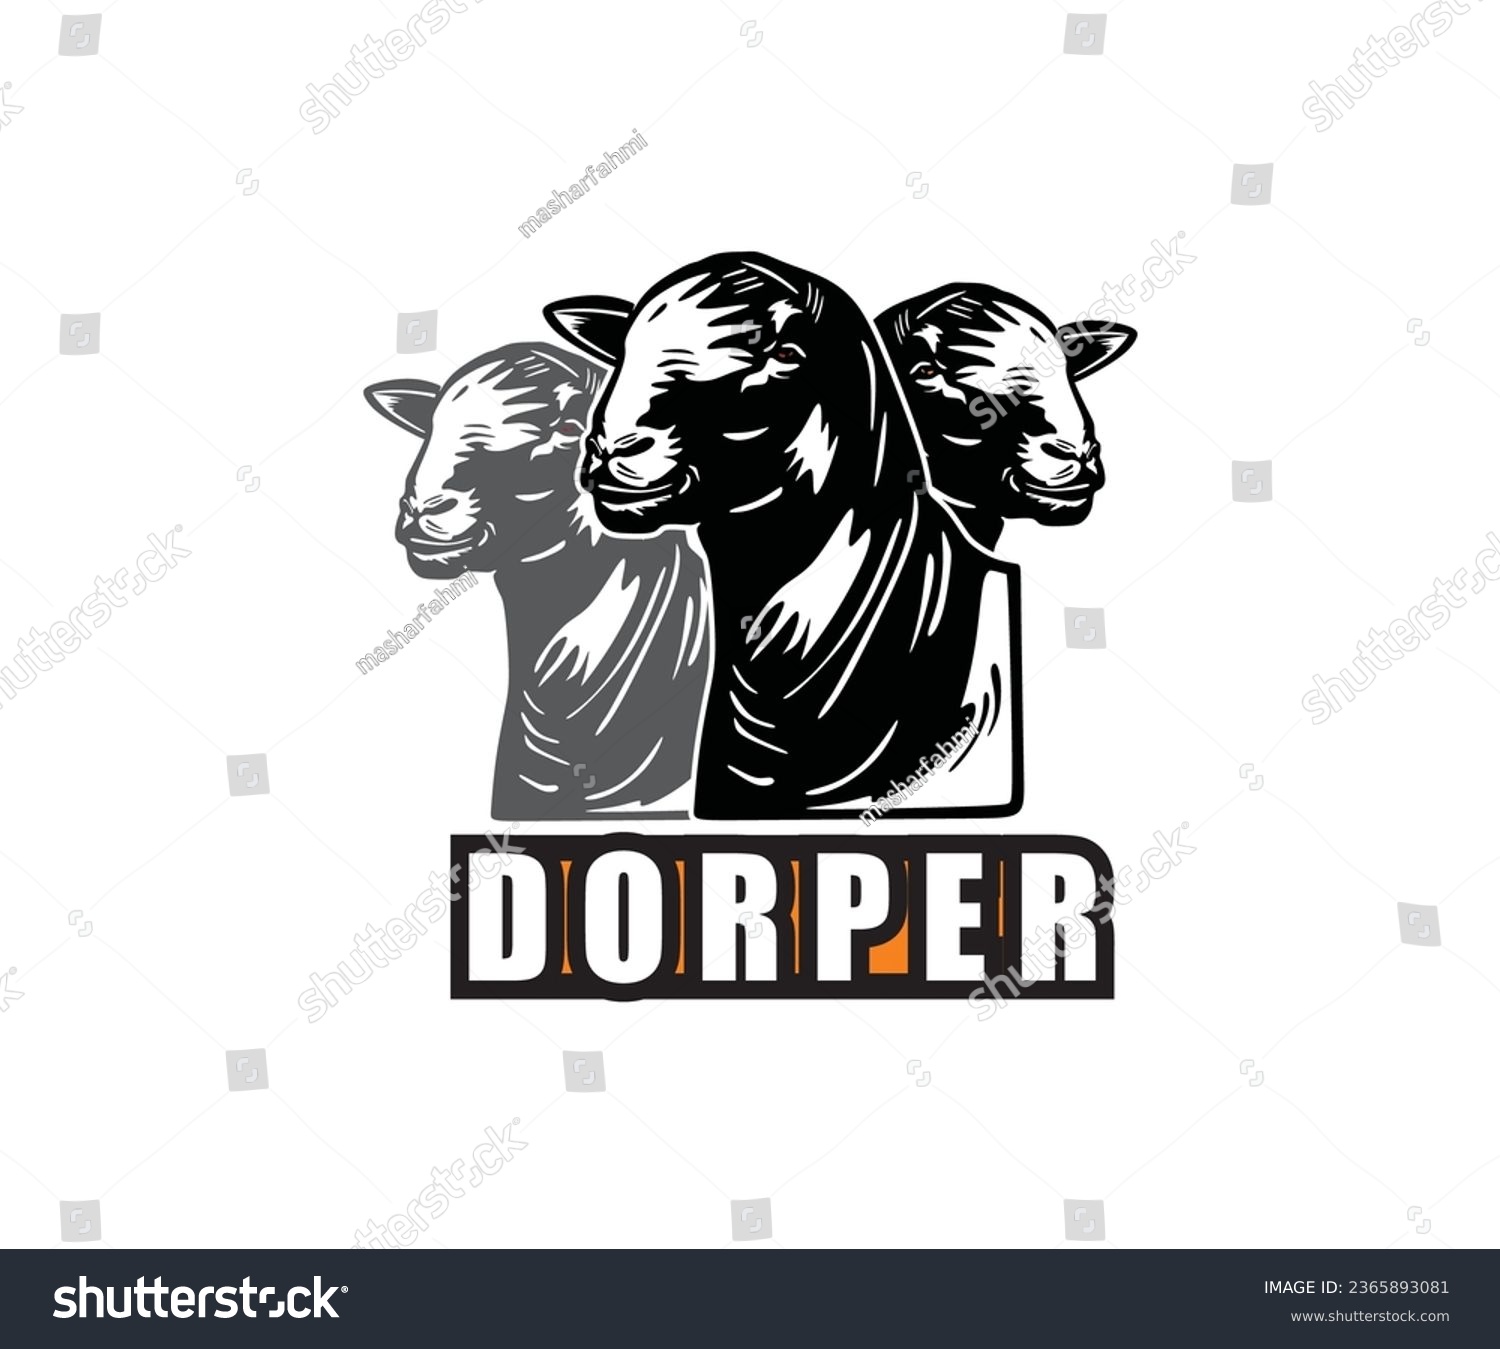 SVG of DORPER SHEEP HEAD LOGO, silhouette of great rams face vector illustrations. svg